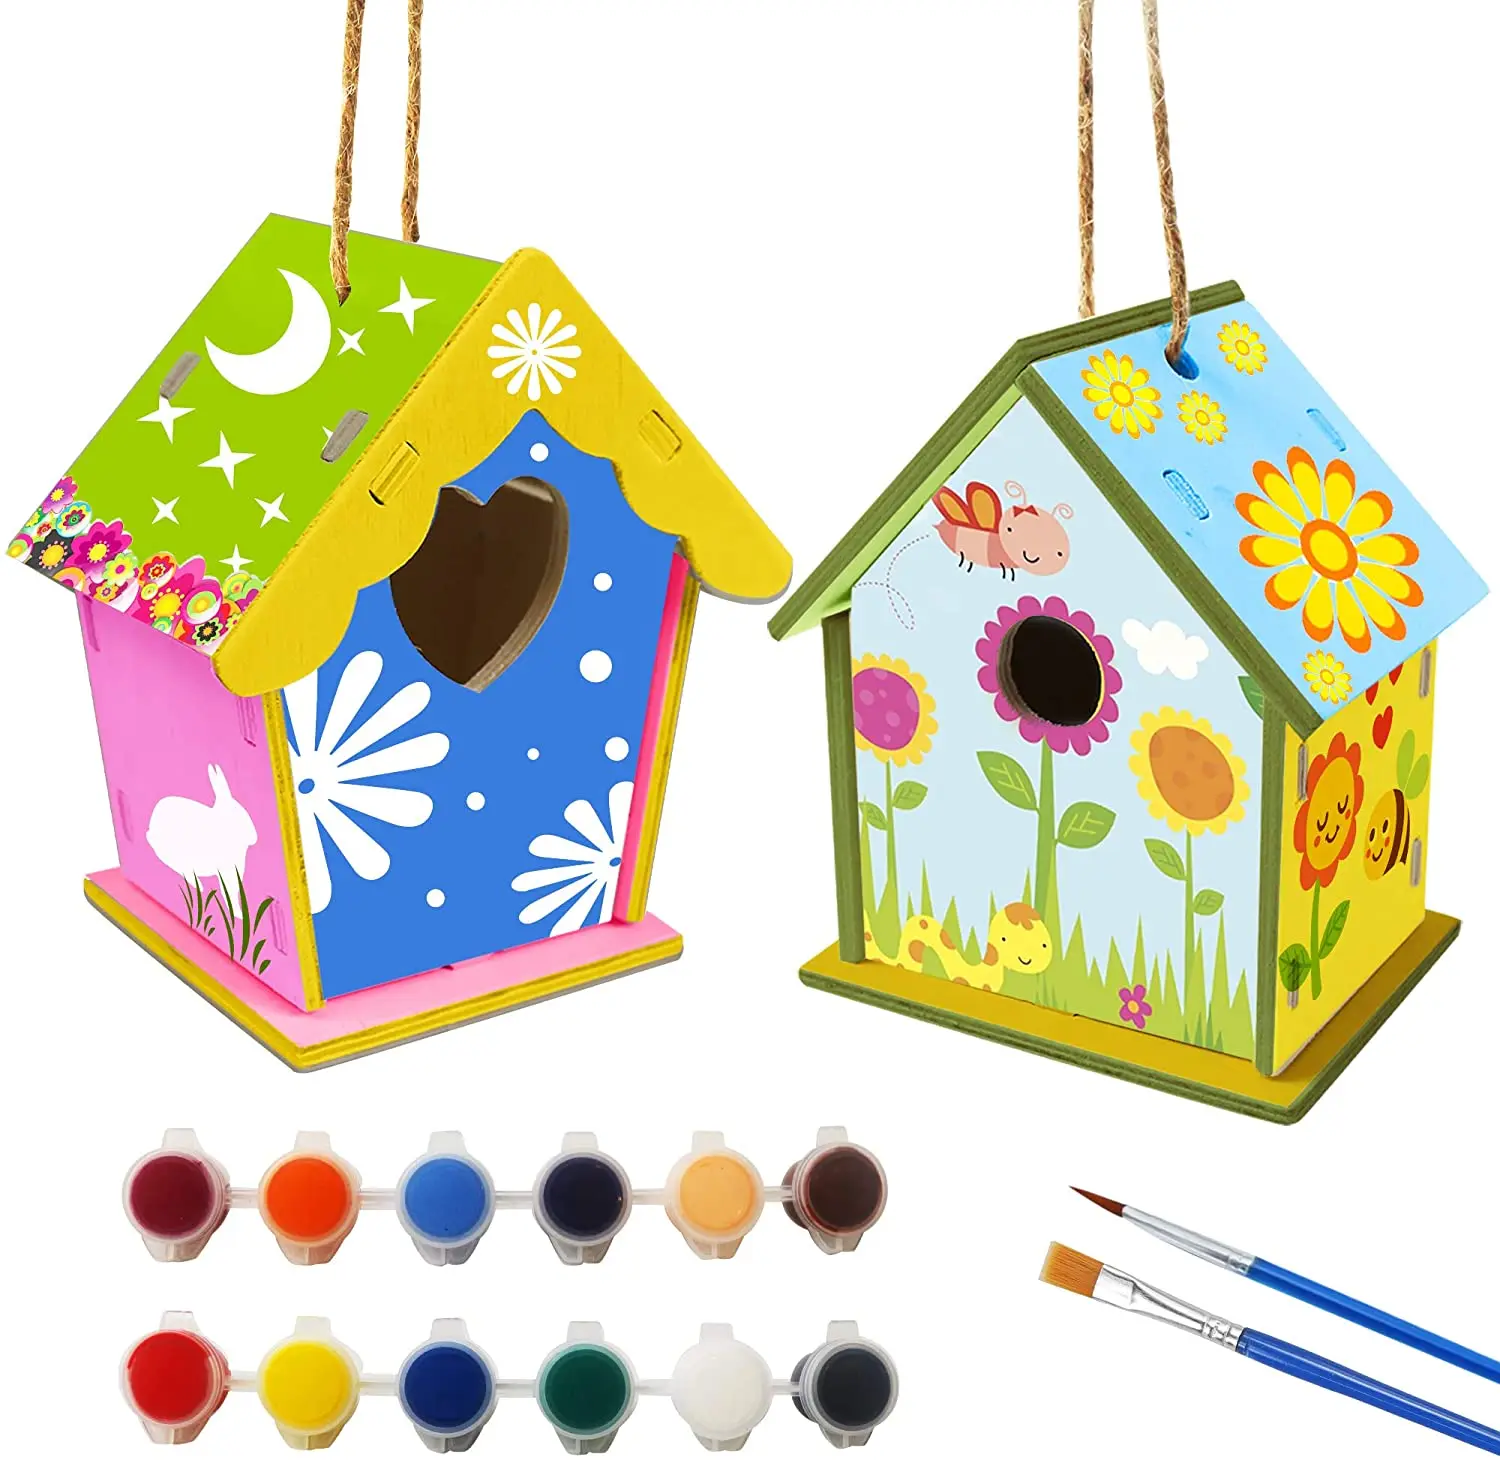 Wood Arts and Crafts Project for Kids 2 Style Wooden Birdhouse Painting Craft Kits with 12-Colors Tools Adults DEUXPER DIY Bird House Kits Teens 